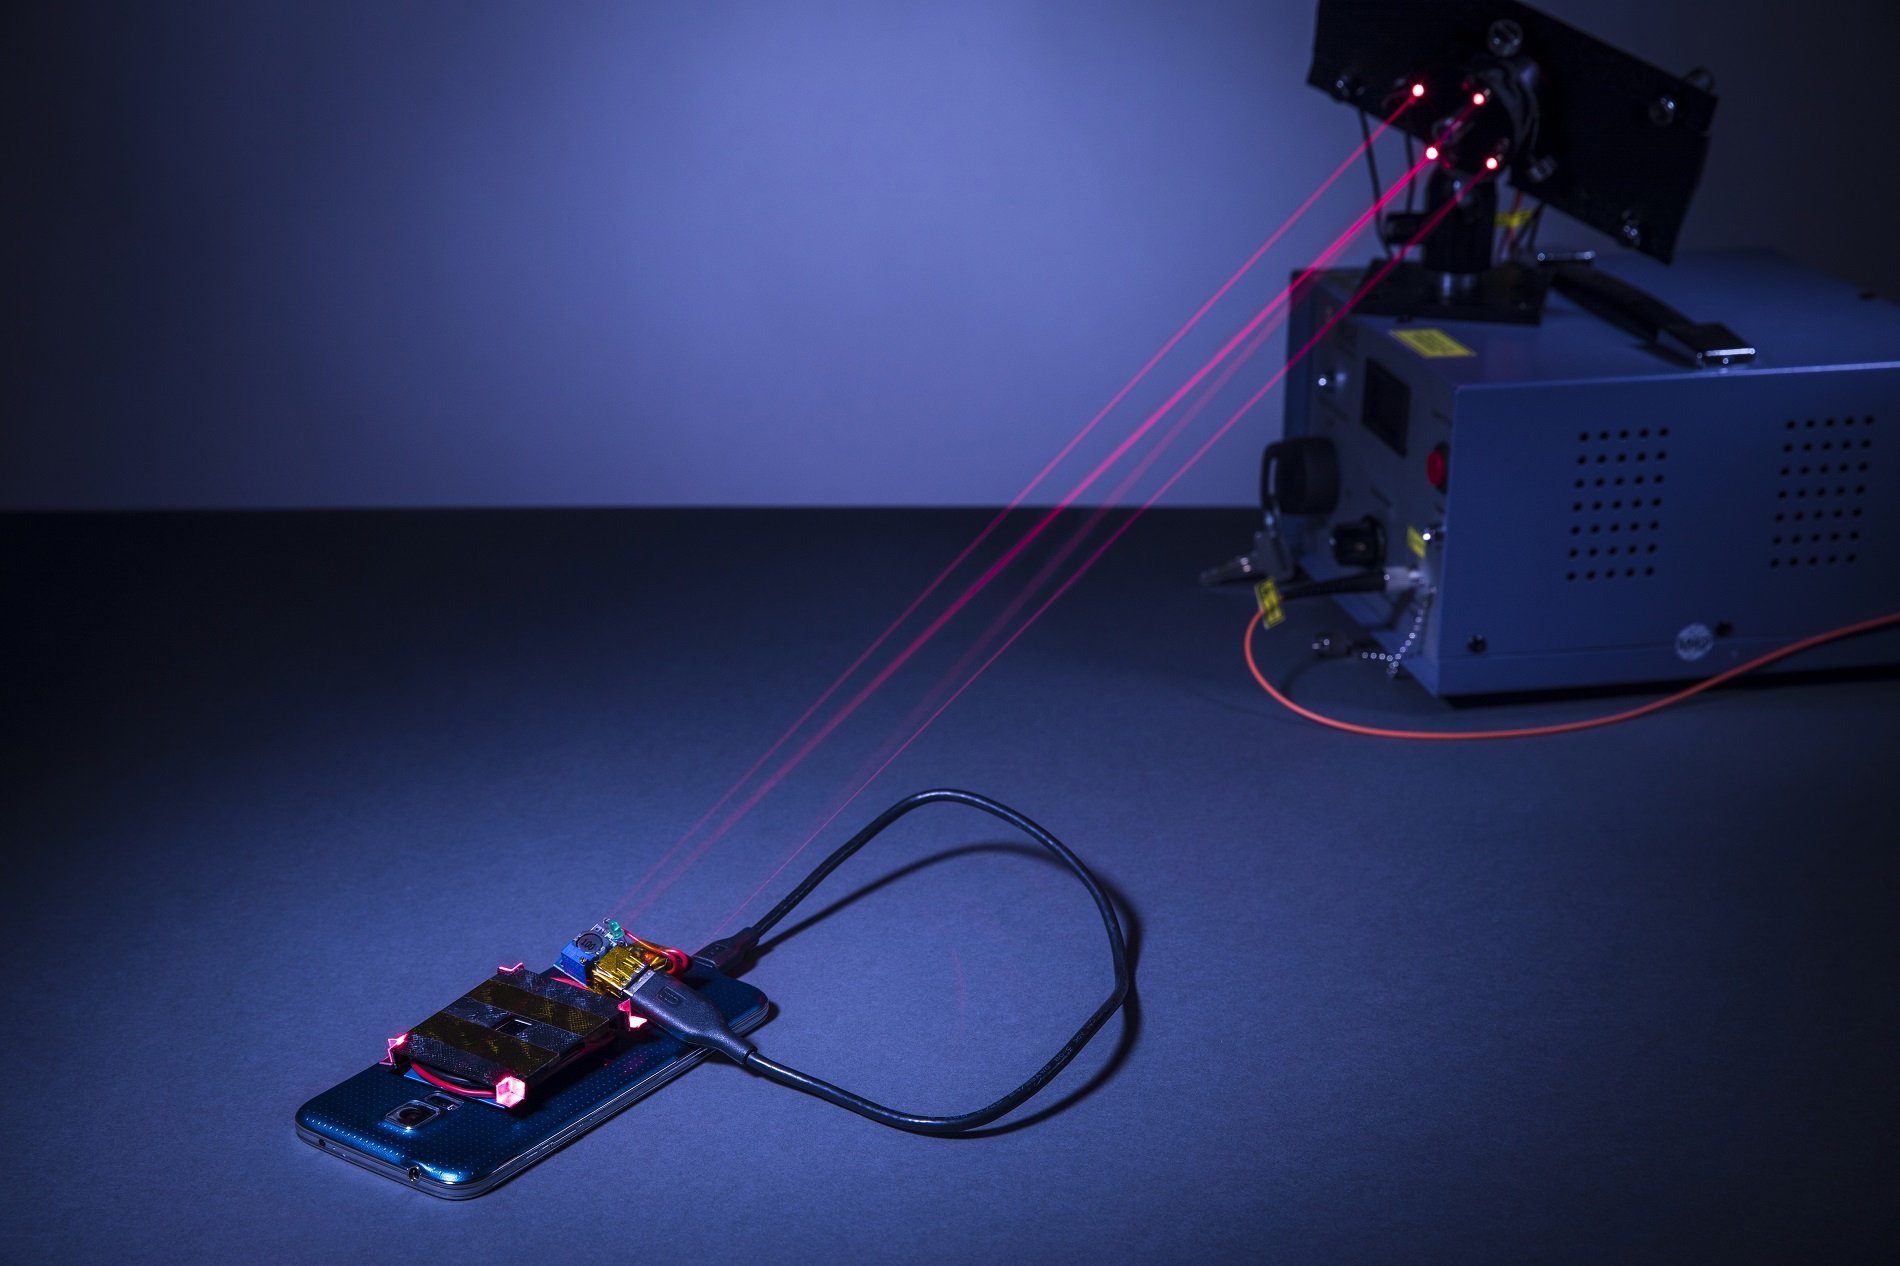 The wireless charging system created by University of Washington engineers